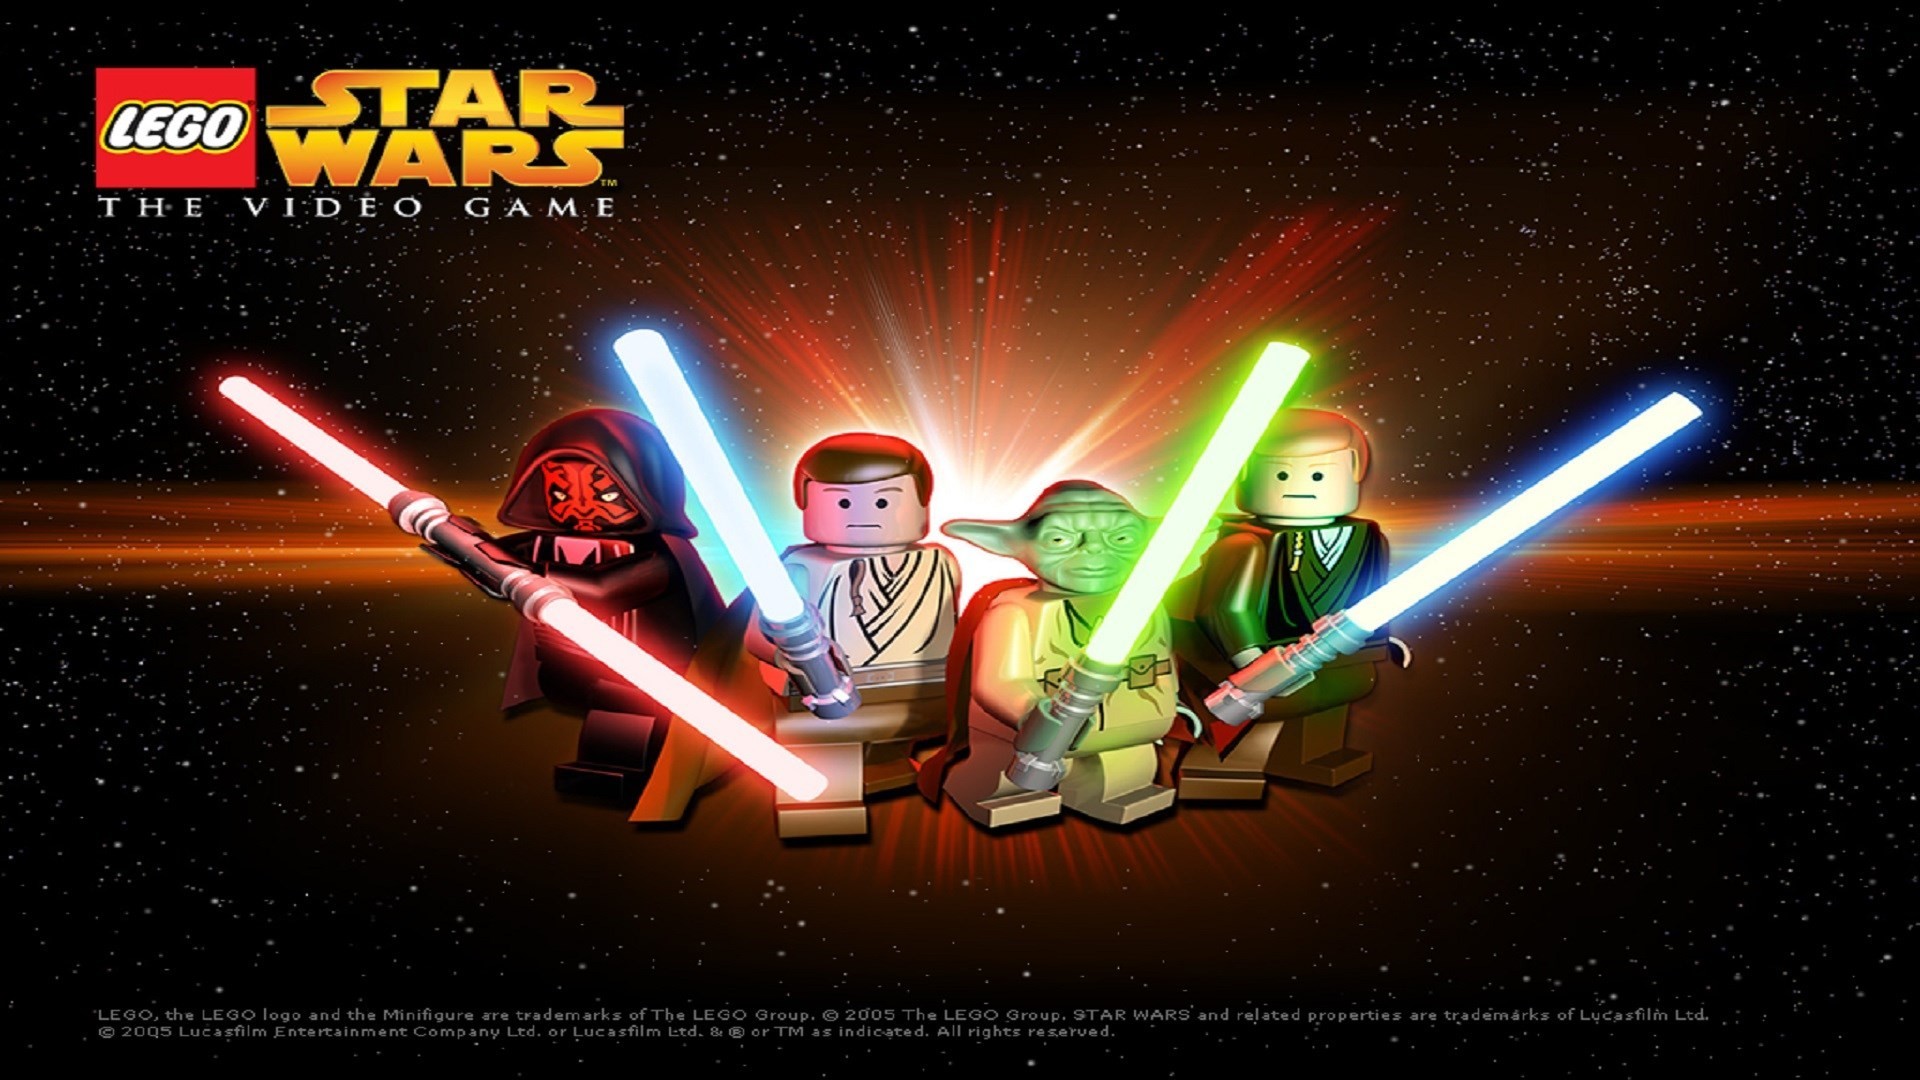 star wars wallpaper hd,graphic design,space,fictional character,font,lego